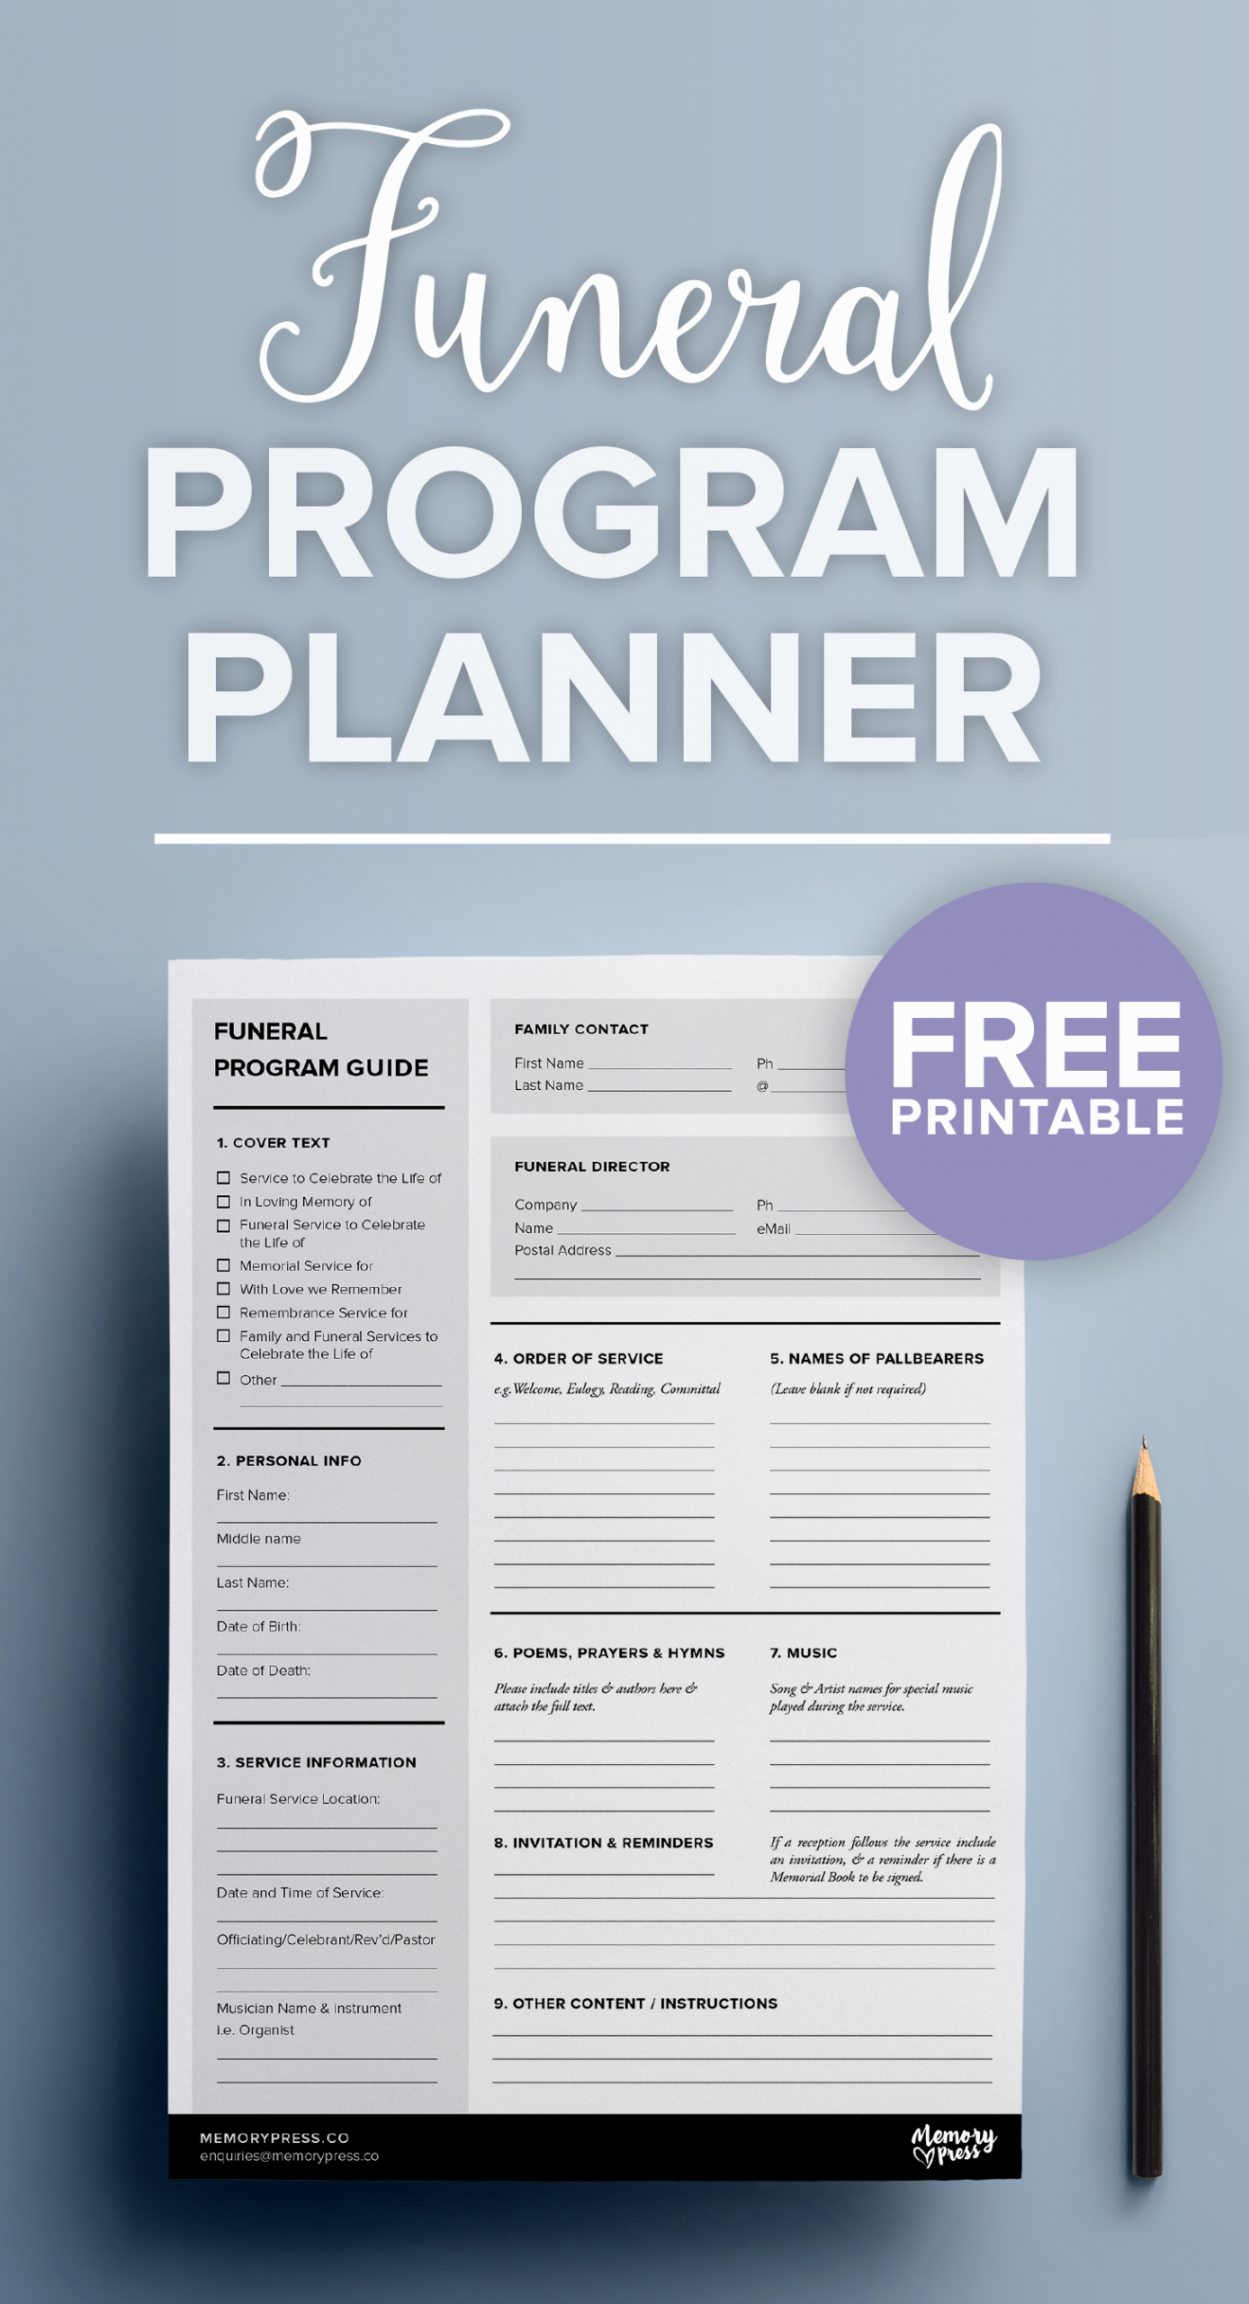 Funeral Planning Checklist Template New Free Printable Funeral  - FREE Printables - Free Printable Funeral Planning Checklist